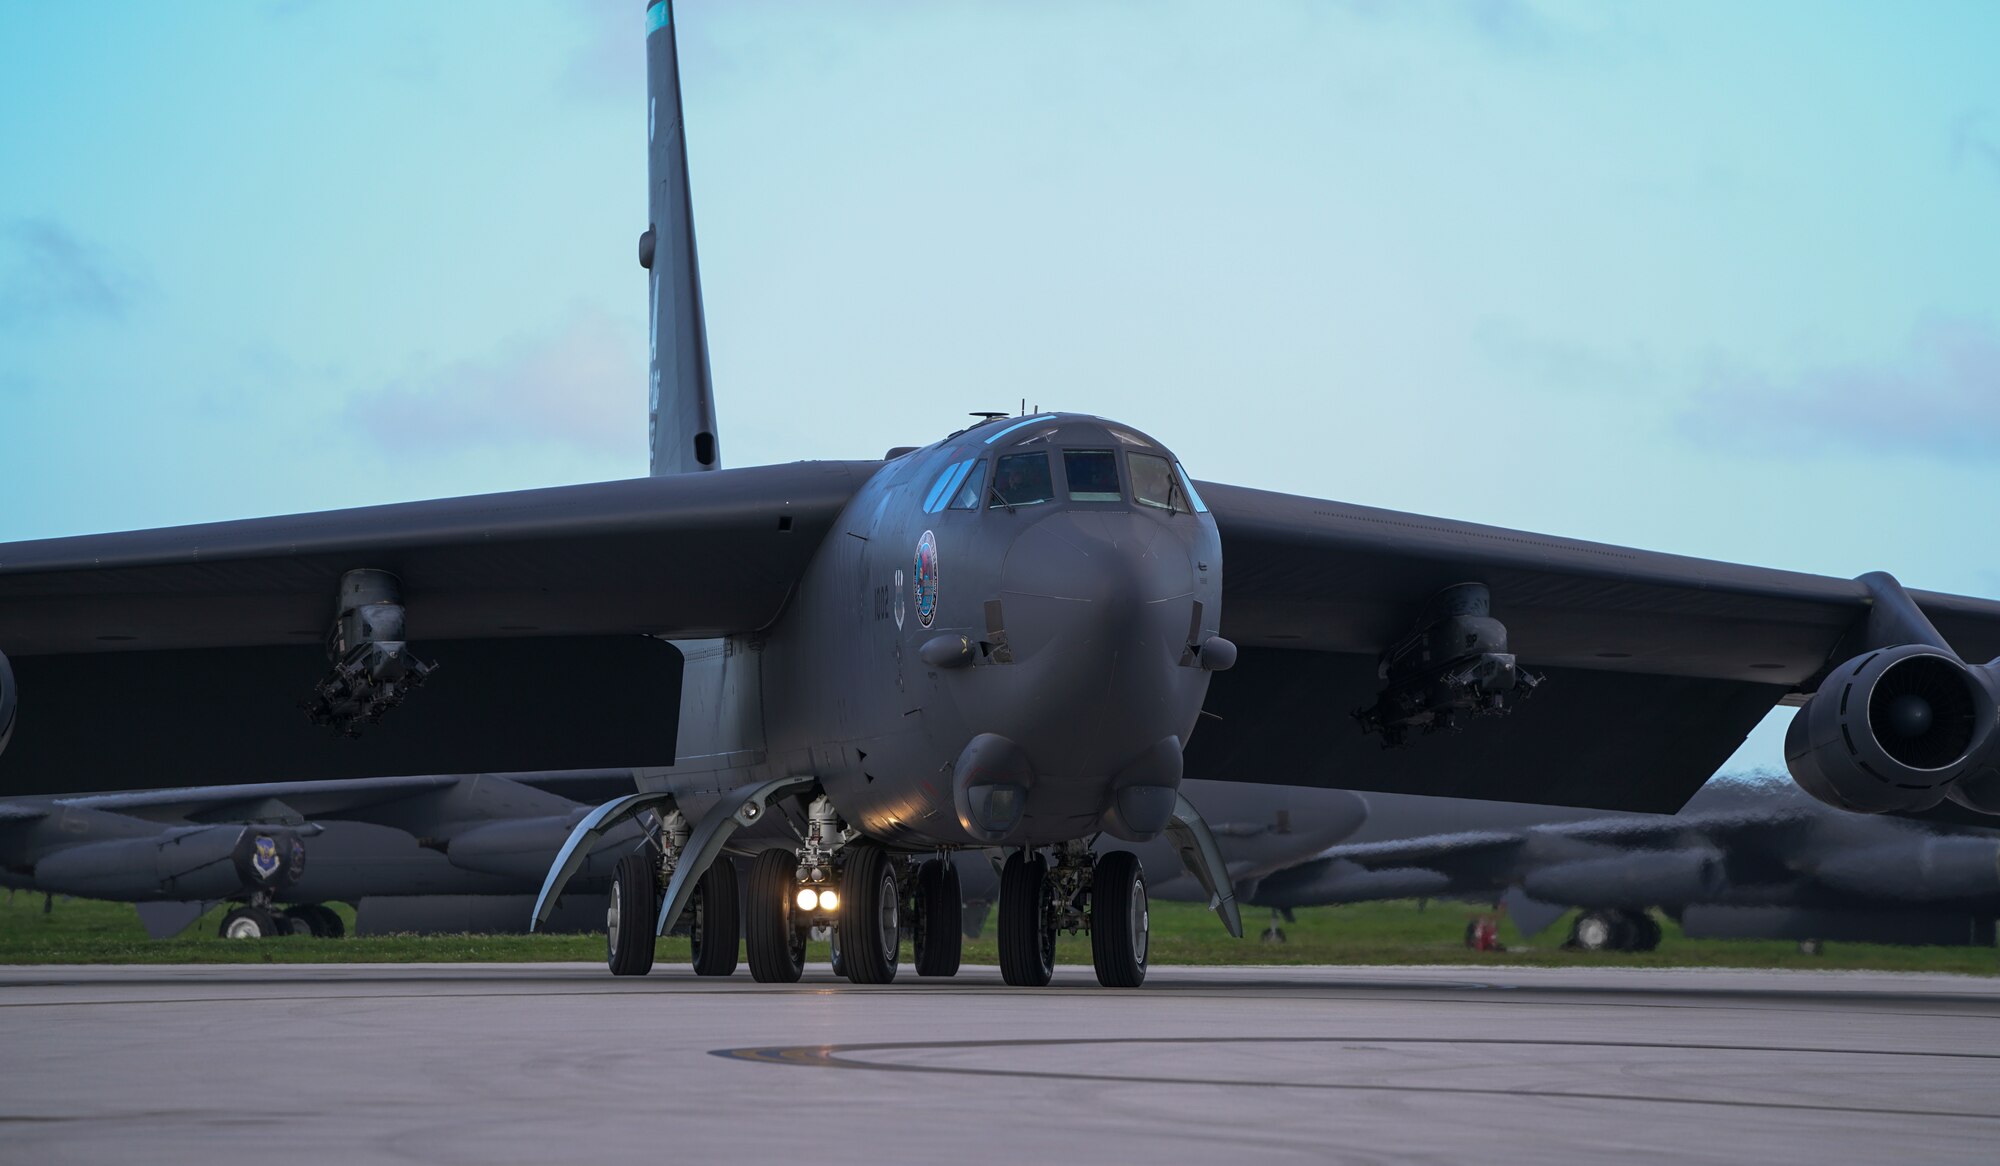 A U.S. Air Force B-52H Stratofortress bomber, deployed from Barksdale Air Force Base, Louisiana, taxis for take off prior to a routine training mission at Andersen Air Force Base, Guam, May 4, 2018.